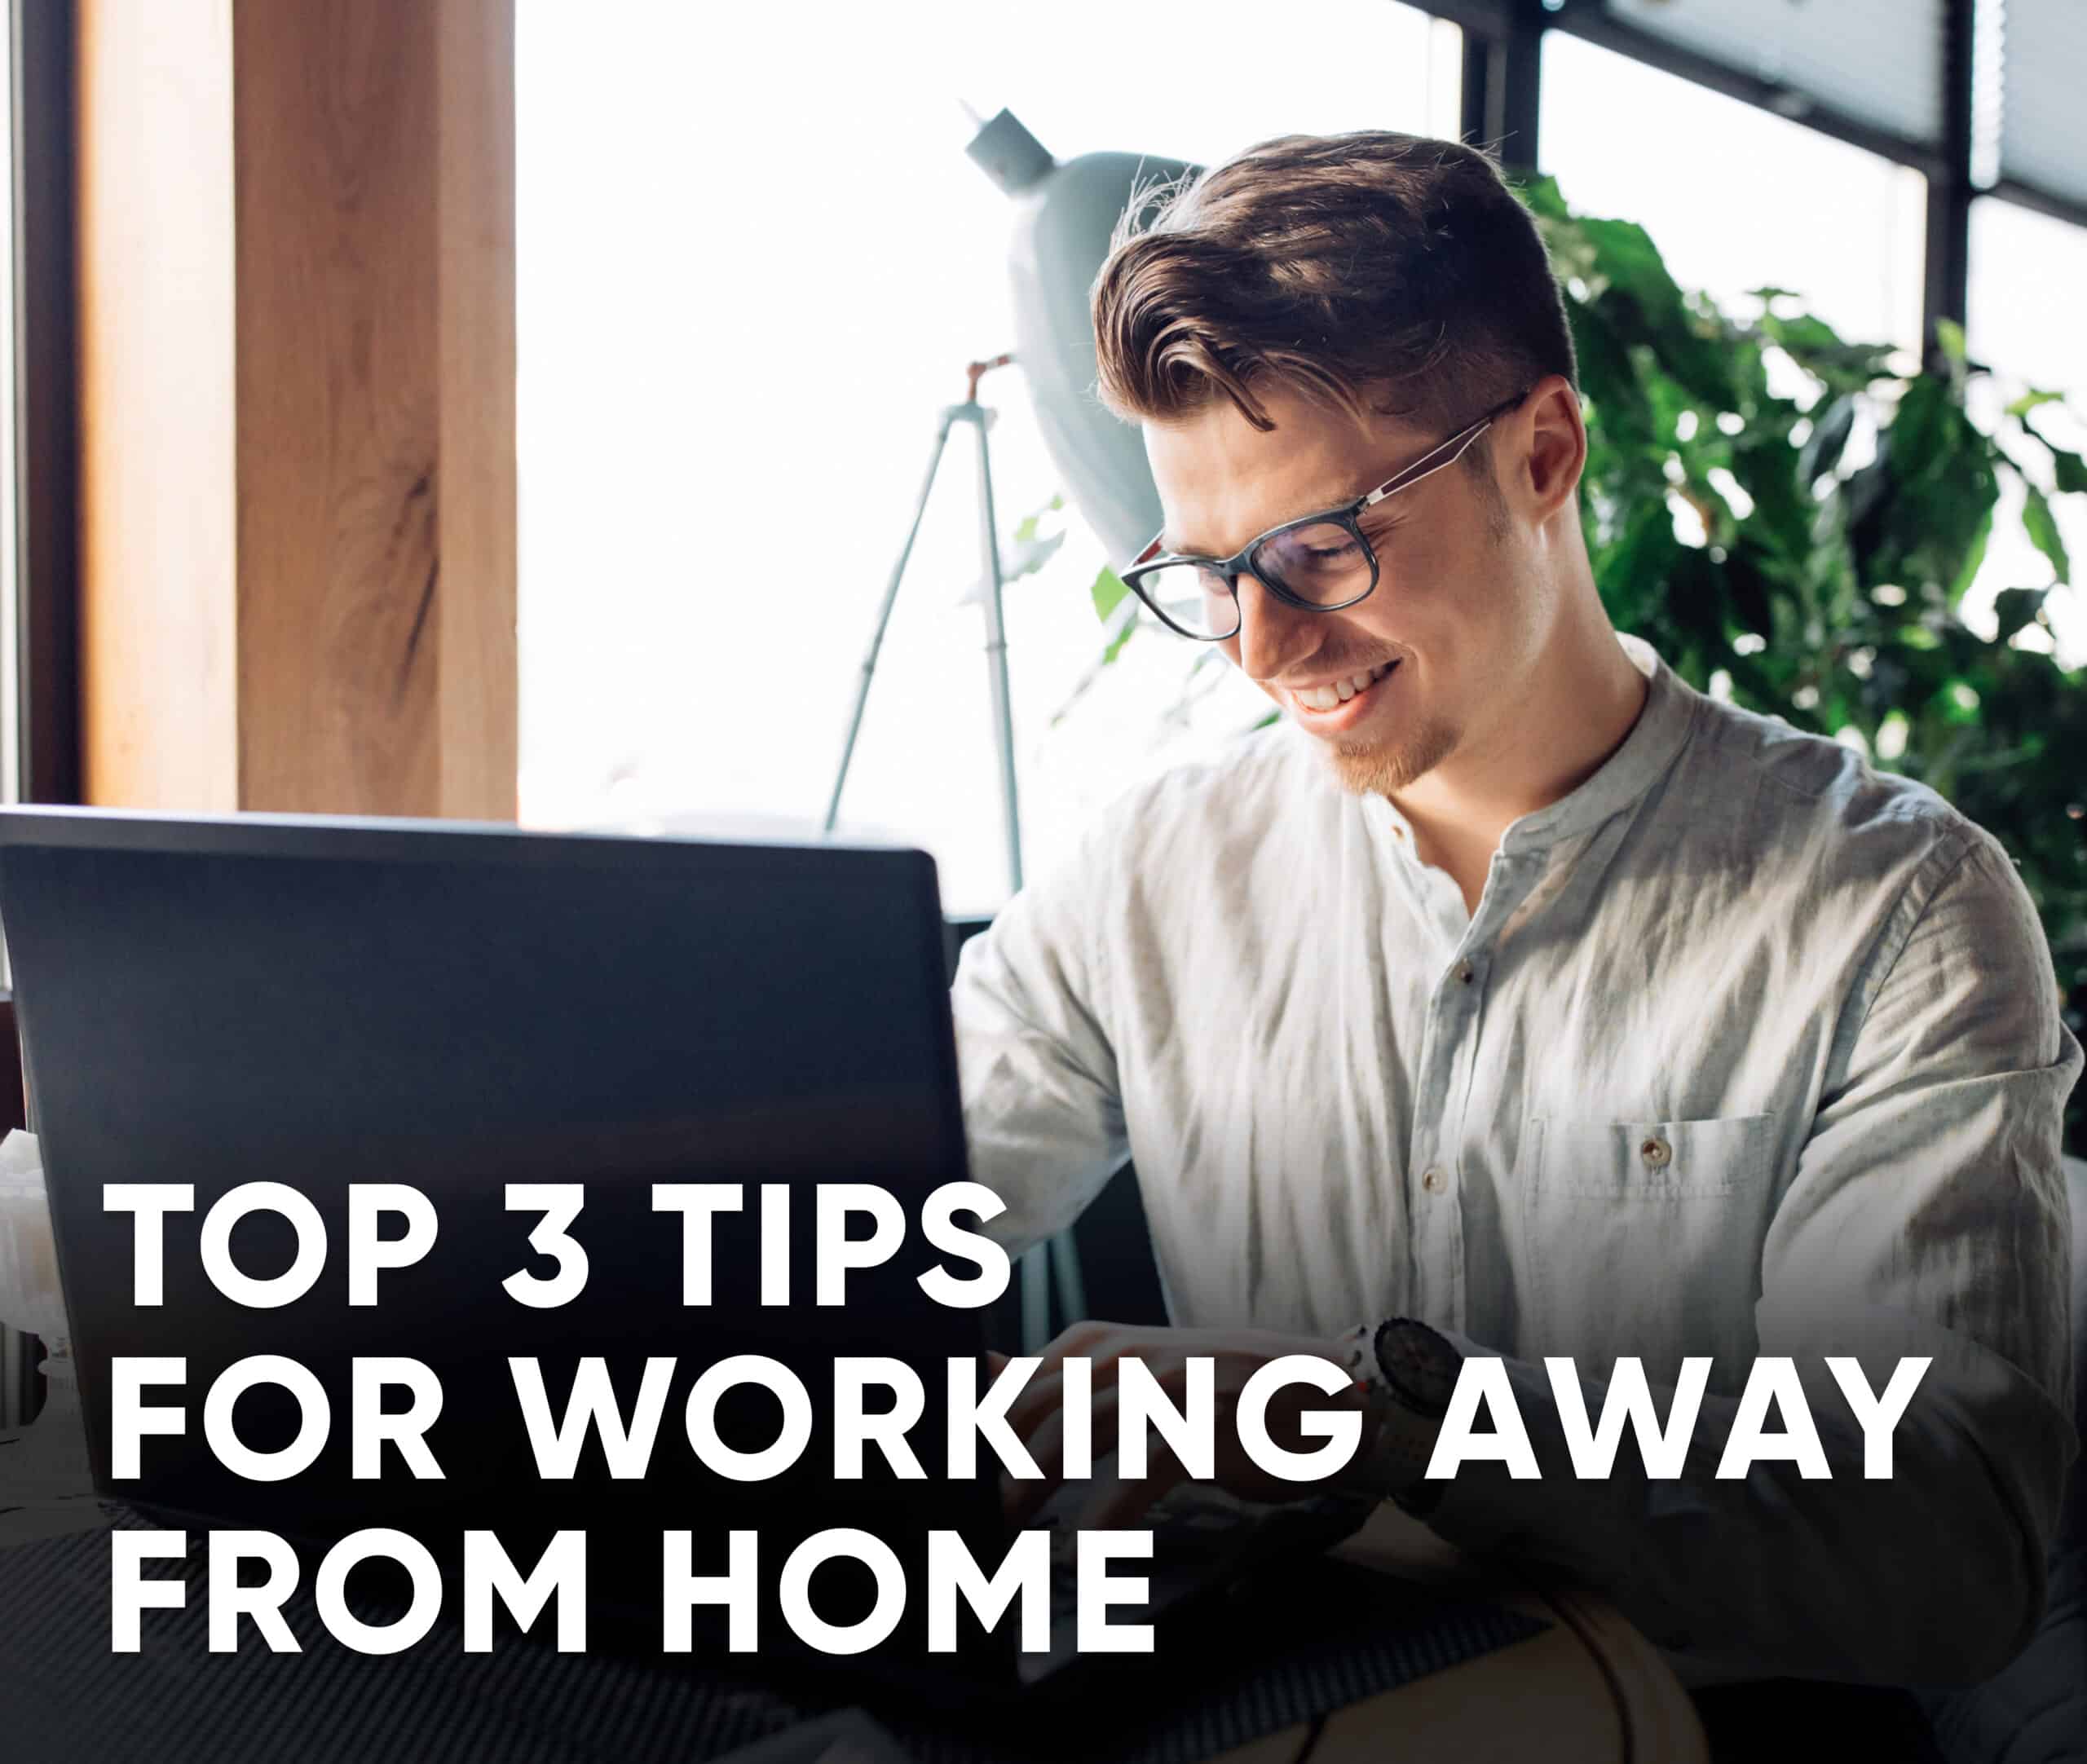 Top 3 Tips for Working Away From Home